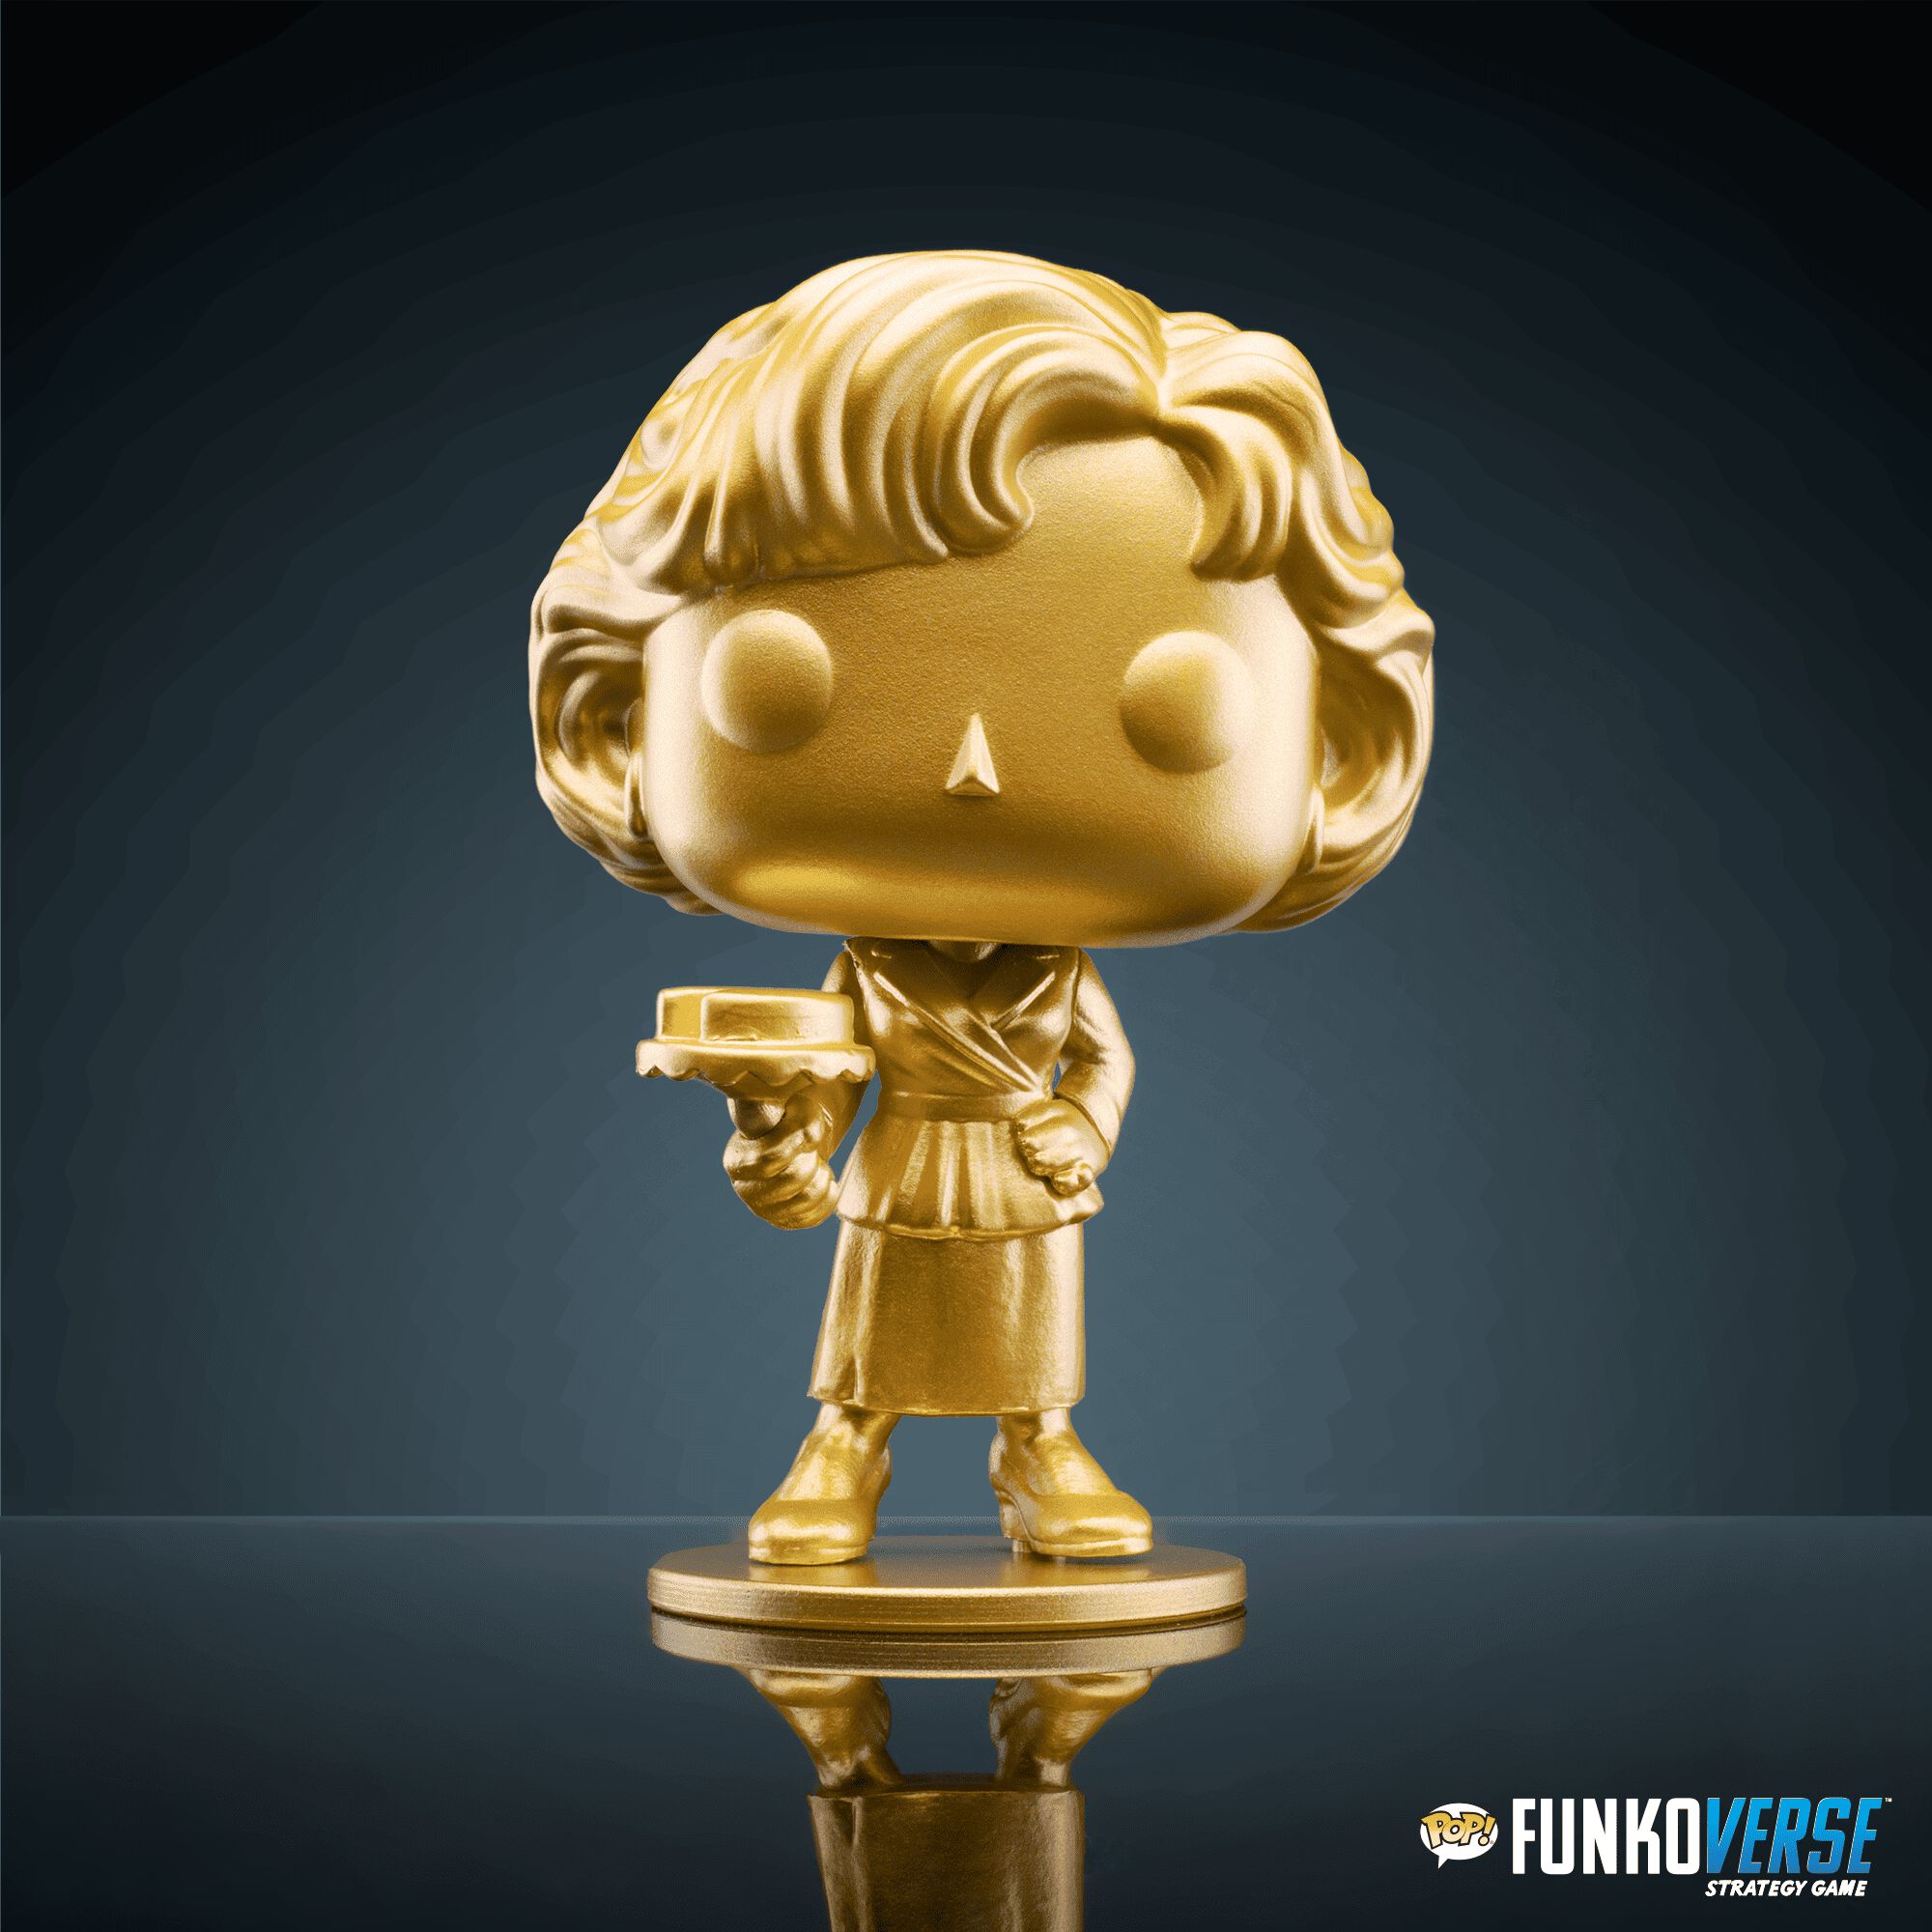 The Funkoverse Scavenger Hunt Continues!